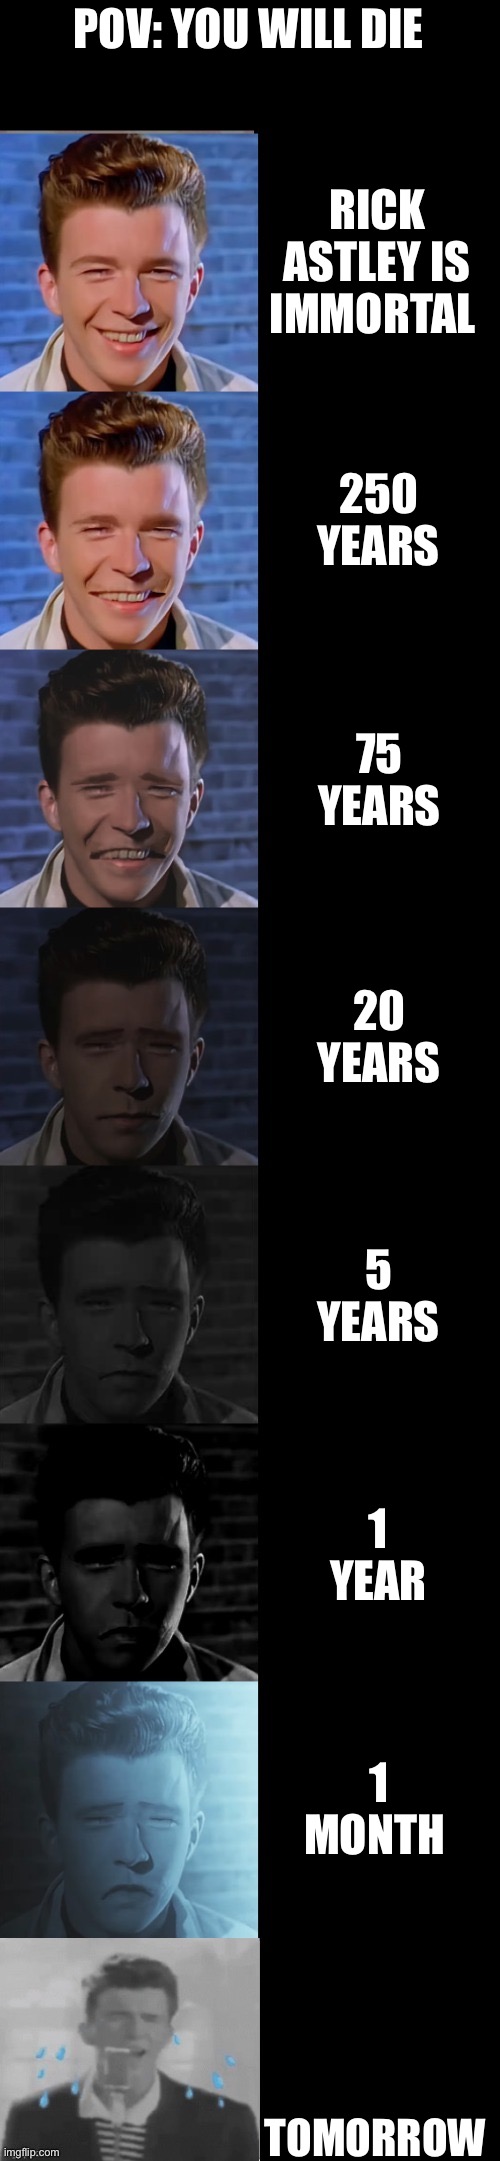 Rick Astley Becoming Sad (You Will Die) | POV: YOU WILL DIE; RICK ASTLEY IS IMMORTAL; 250 YEARS; 75 YEARS; 20 YEARS; 5 YEARS; 1 YEAR; 1 MONTH; TOMORROW | image tagged in rick astley becoming sad true form | made w/ Imgflip meme maker